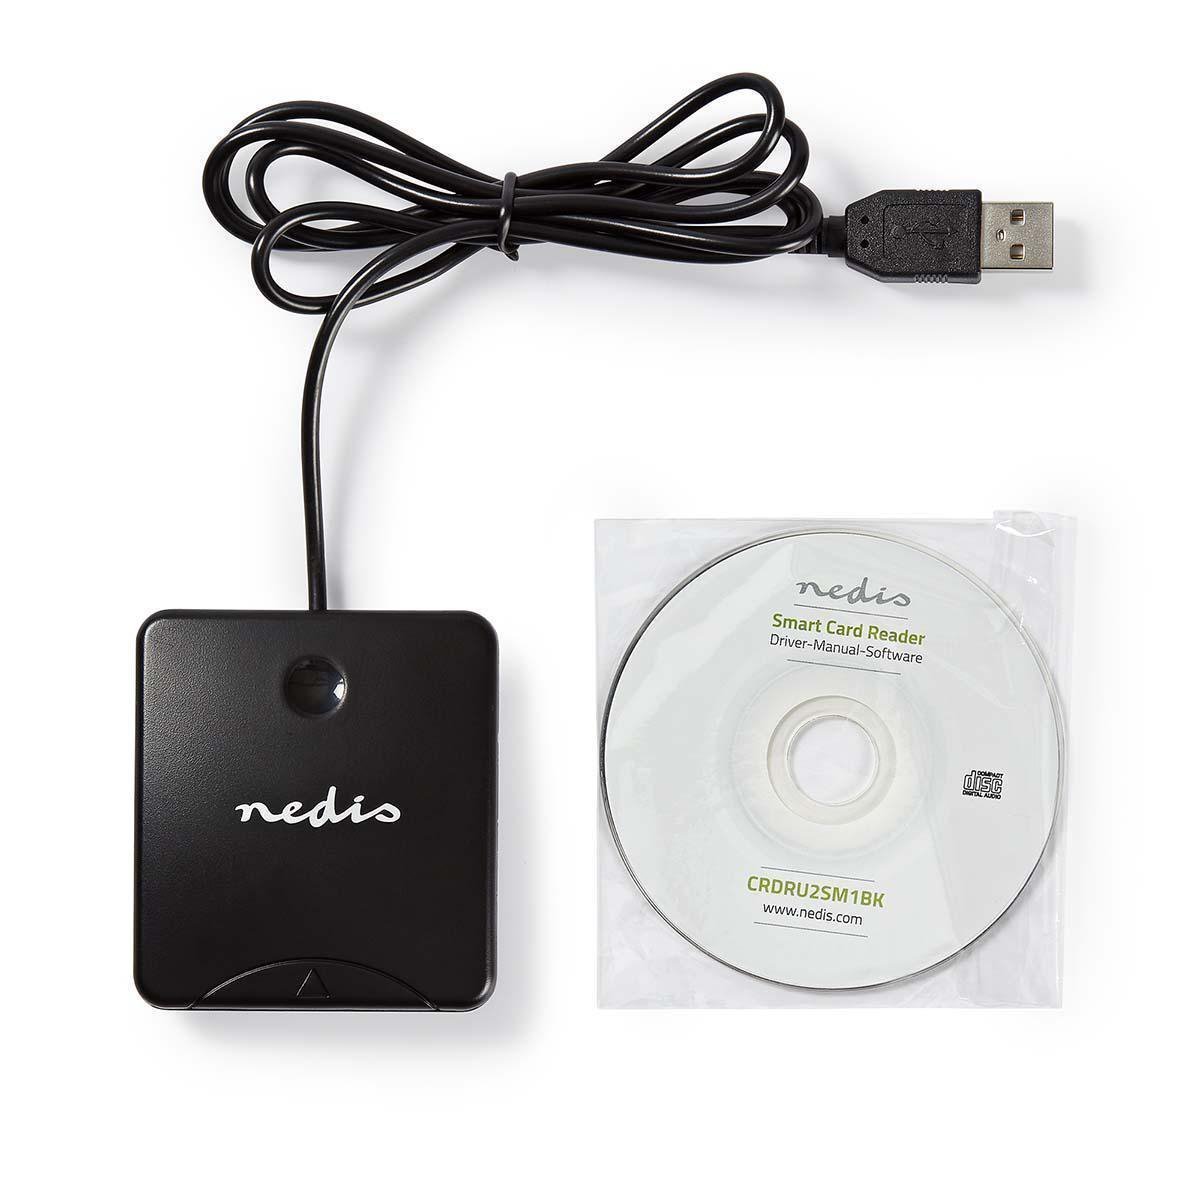 Card Reader Smart Card Software Included USB 2.0 | Videotronics E-Store